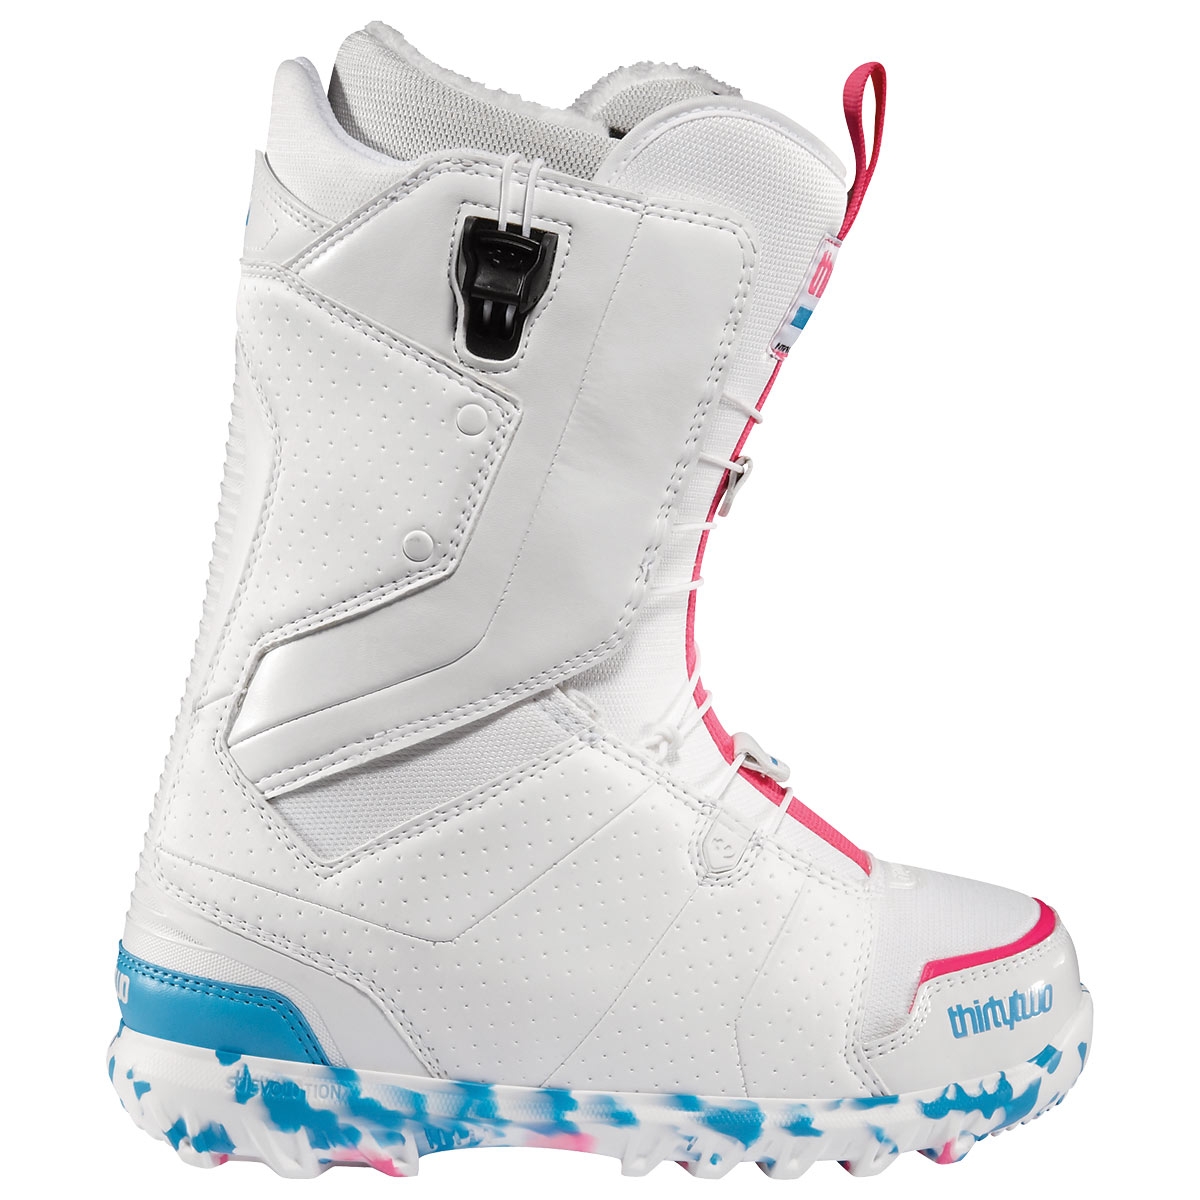 Thirtytwo Lashed Ft W white/pink/blue 